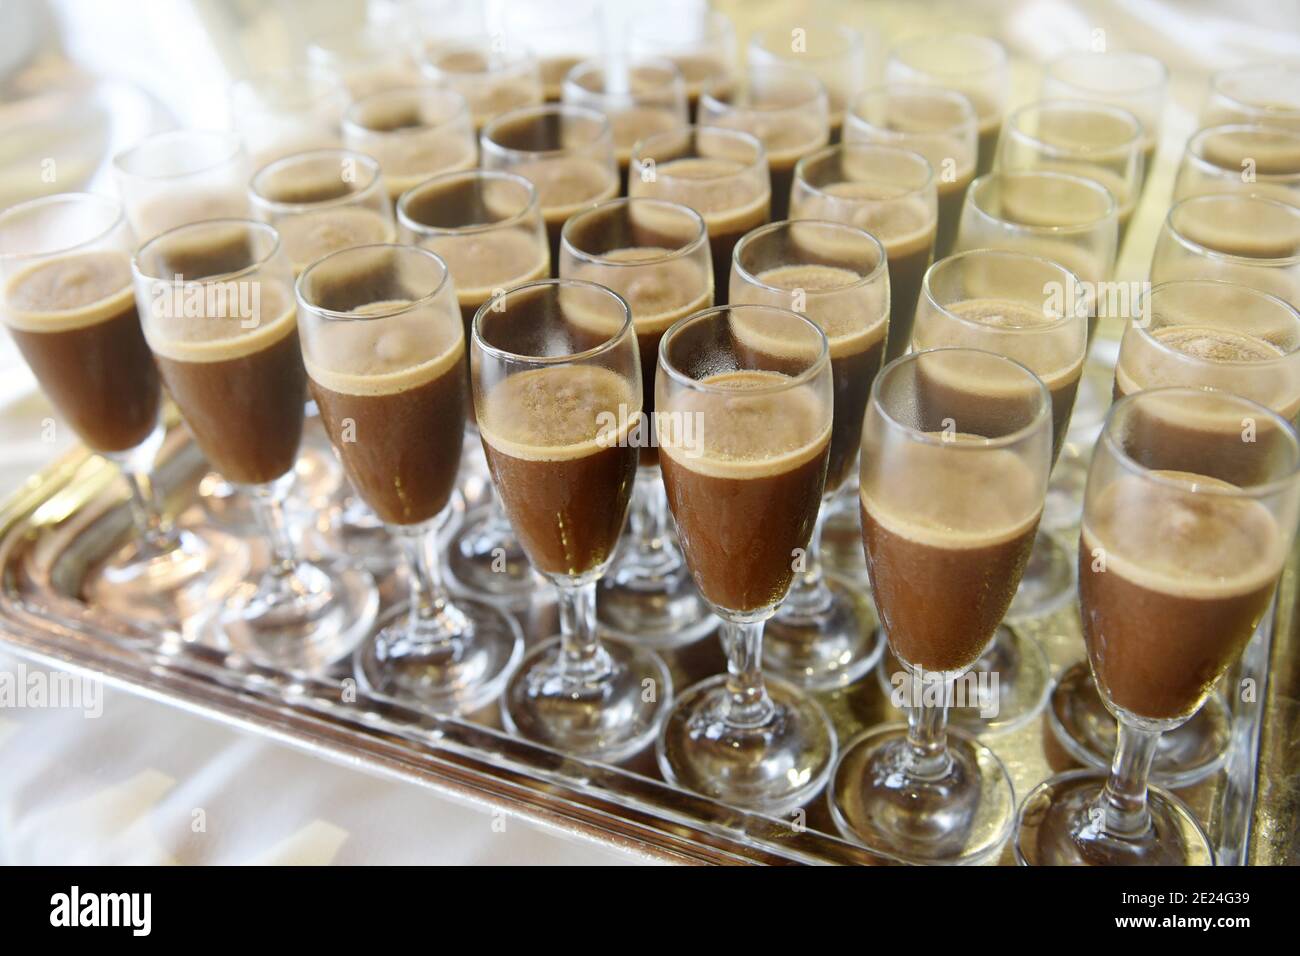 Elegant glasses of iced coffee on a tray on a buffet table at a catered event ready for serving Stock Photo